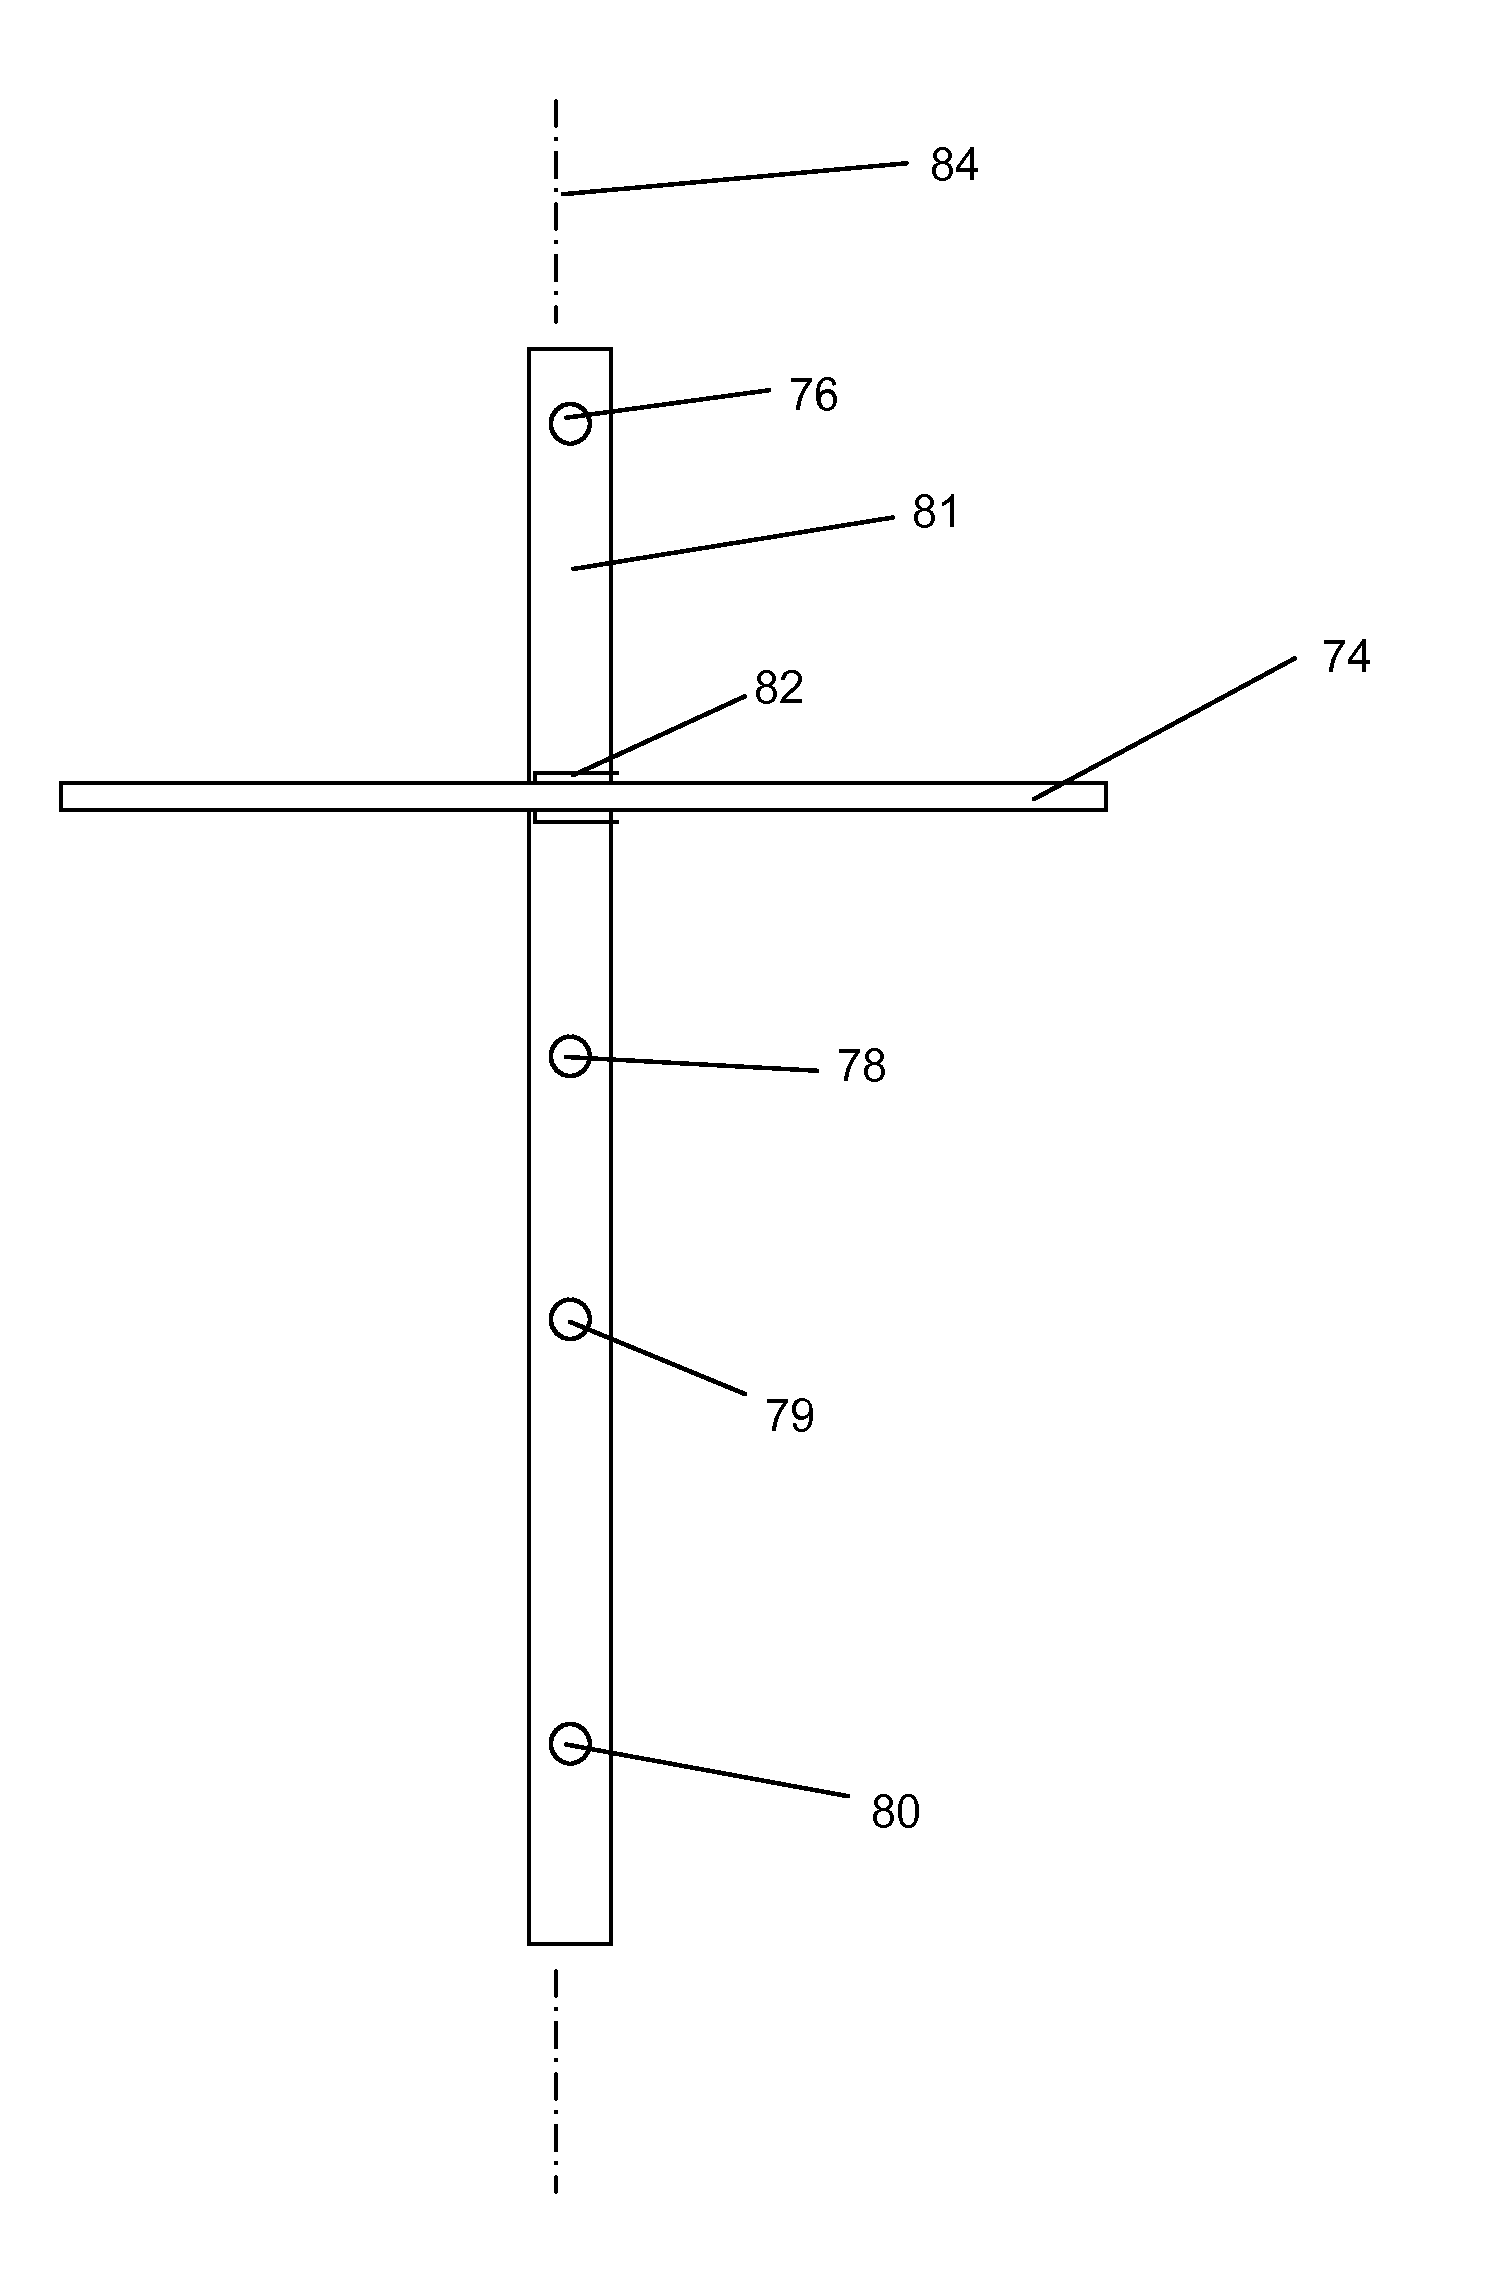 Wireless networking adapter and variable beam width antenna